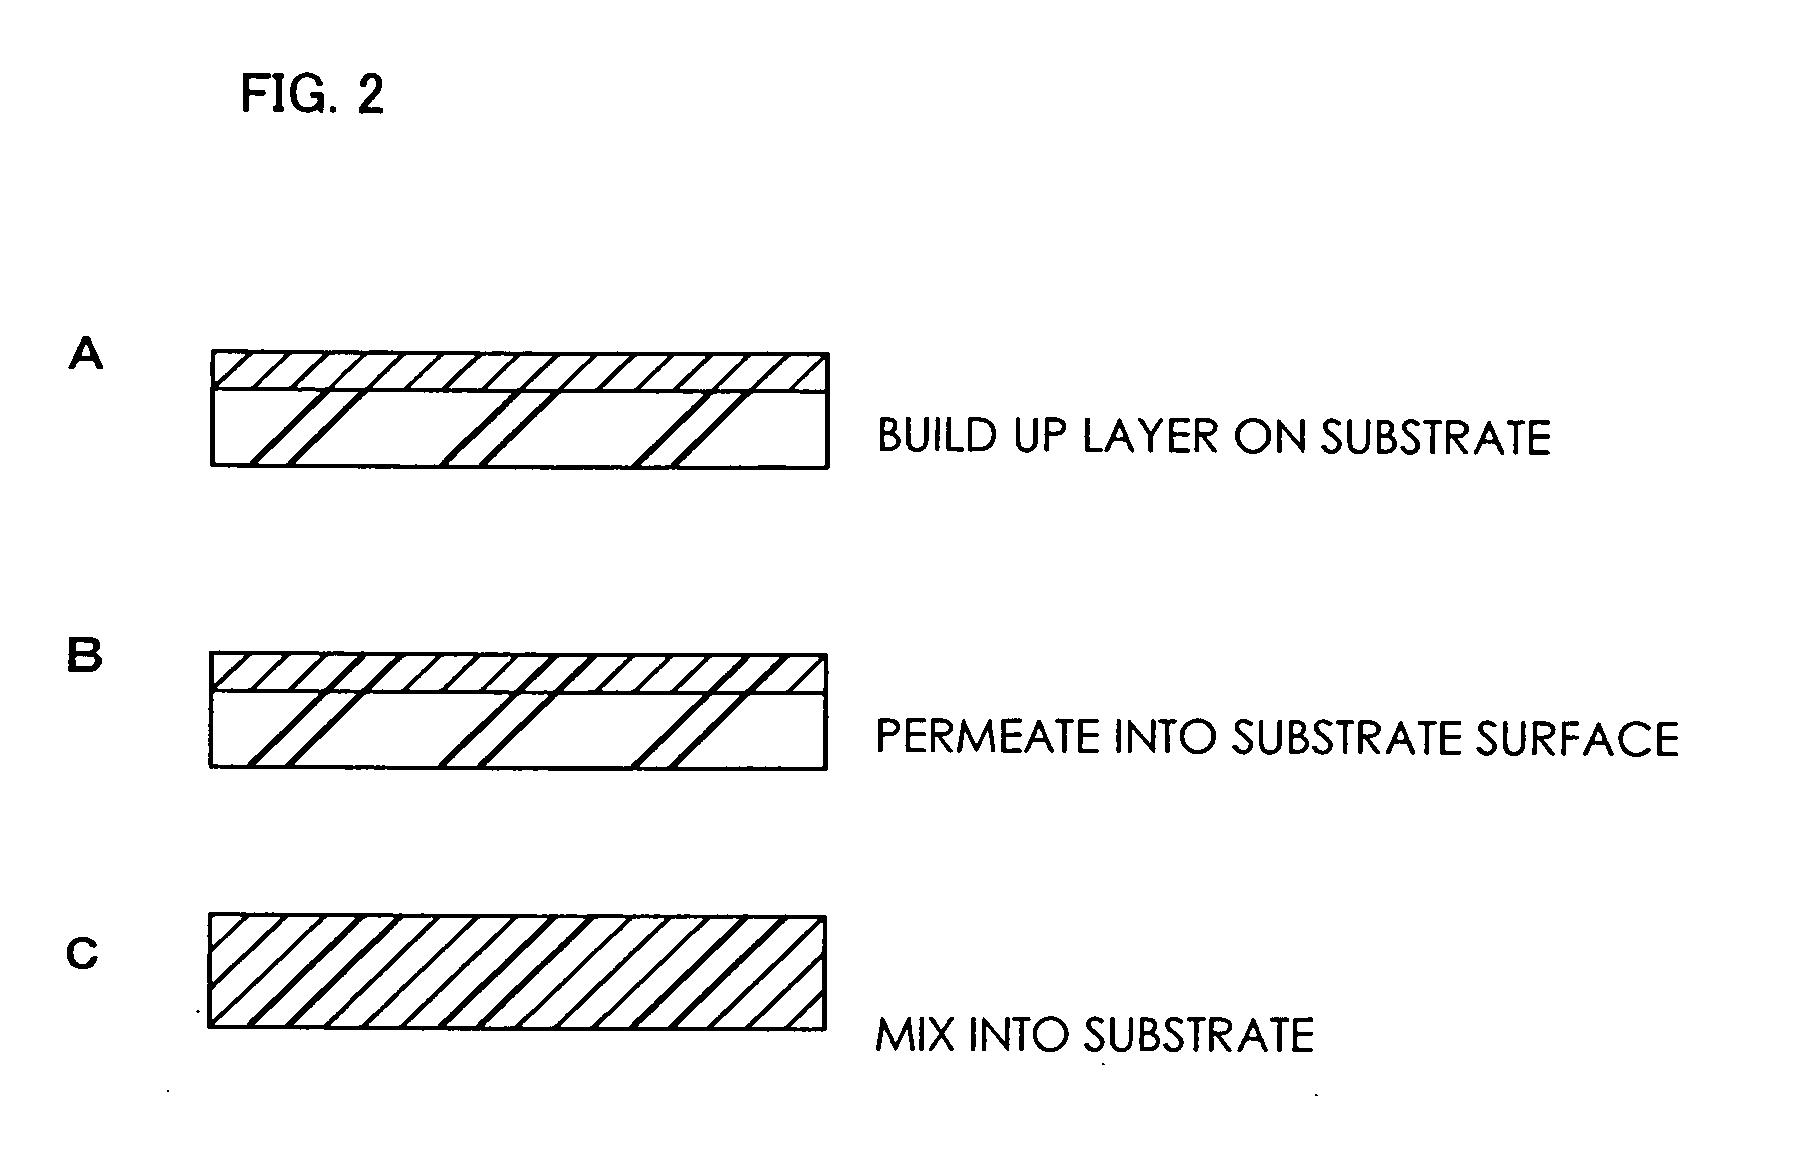 Titania-metal composite and method for preparation thereof, and film forming method using dispersion comprising the composite